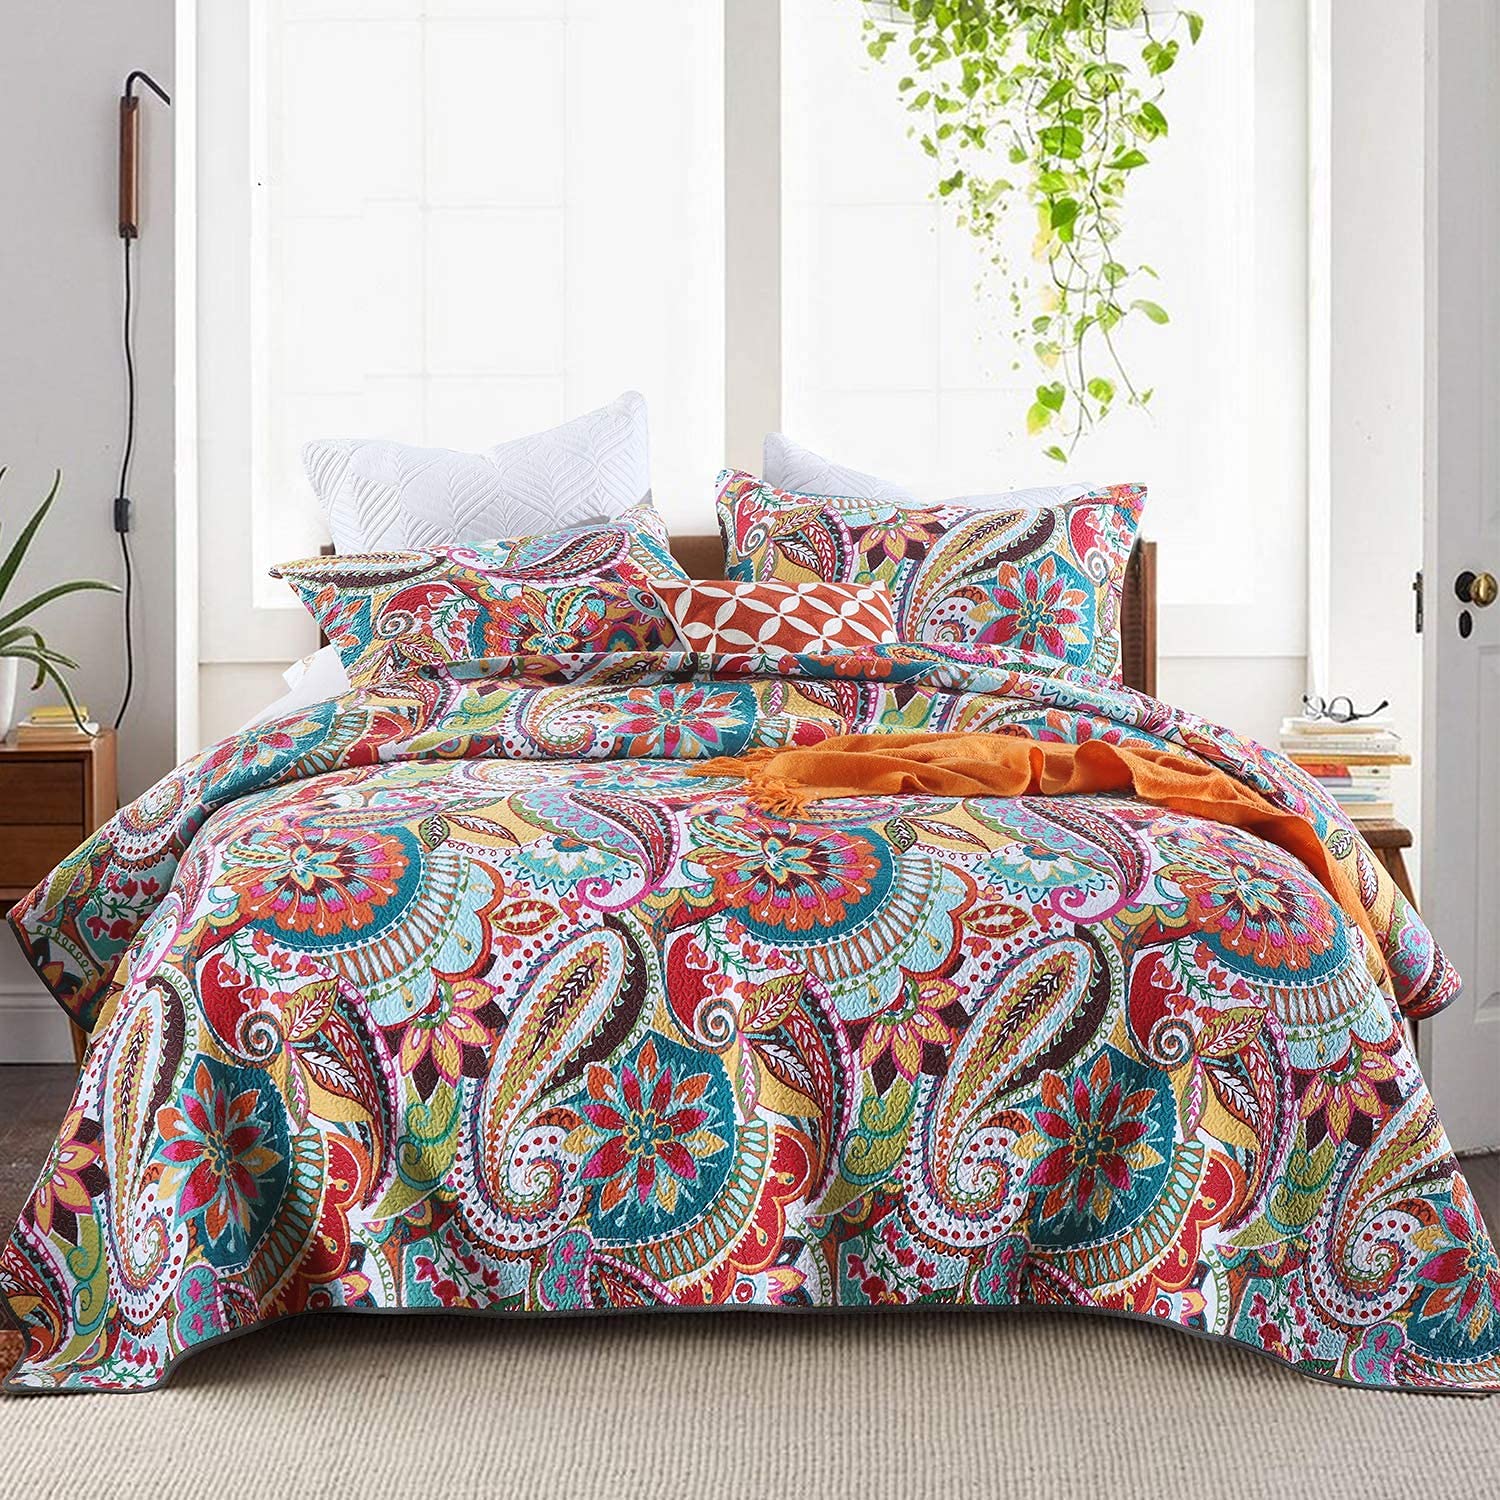 Great Choice Products King Quilt Set, Gorgeous Paisley Pattern Bedspreads King Size, Colorful Red, Orange And Blue, Soft Cotton Lightweight Boho Qu…